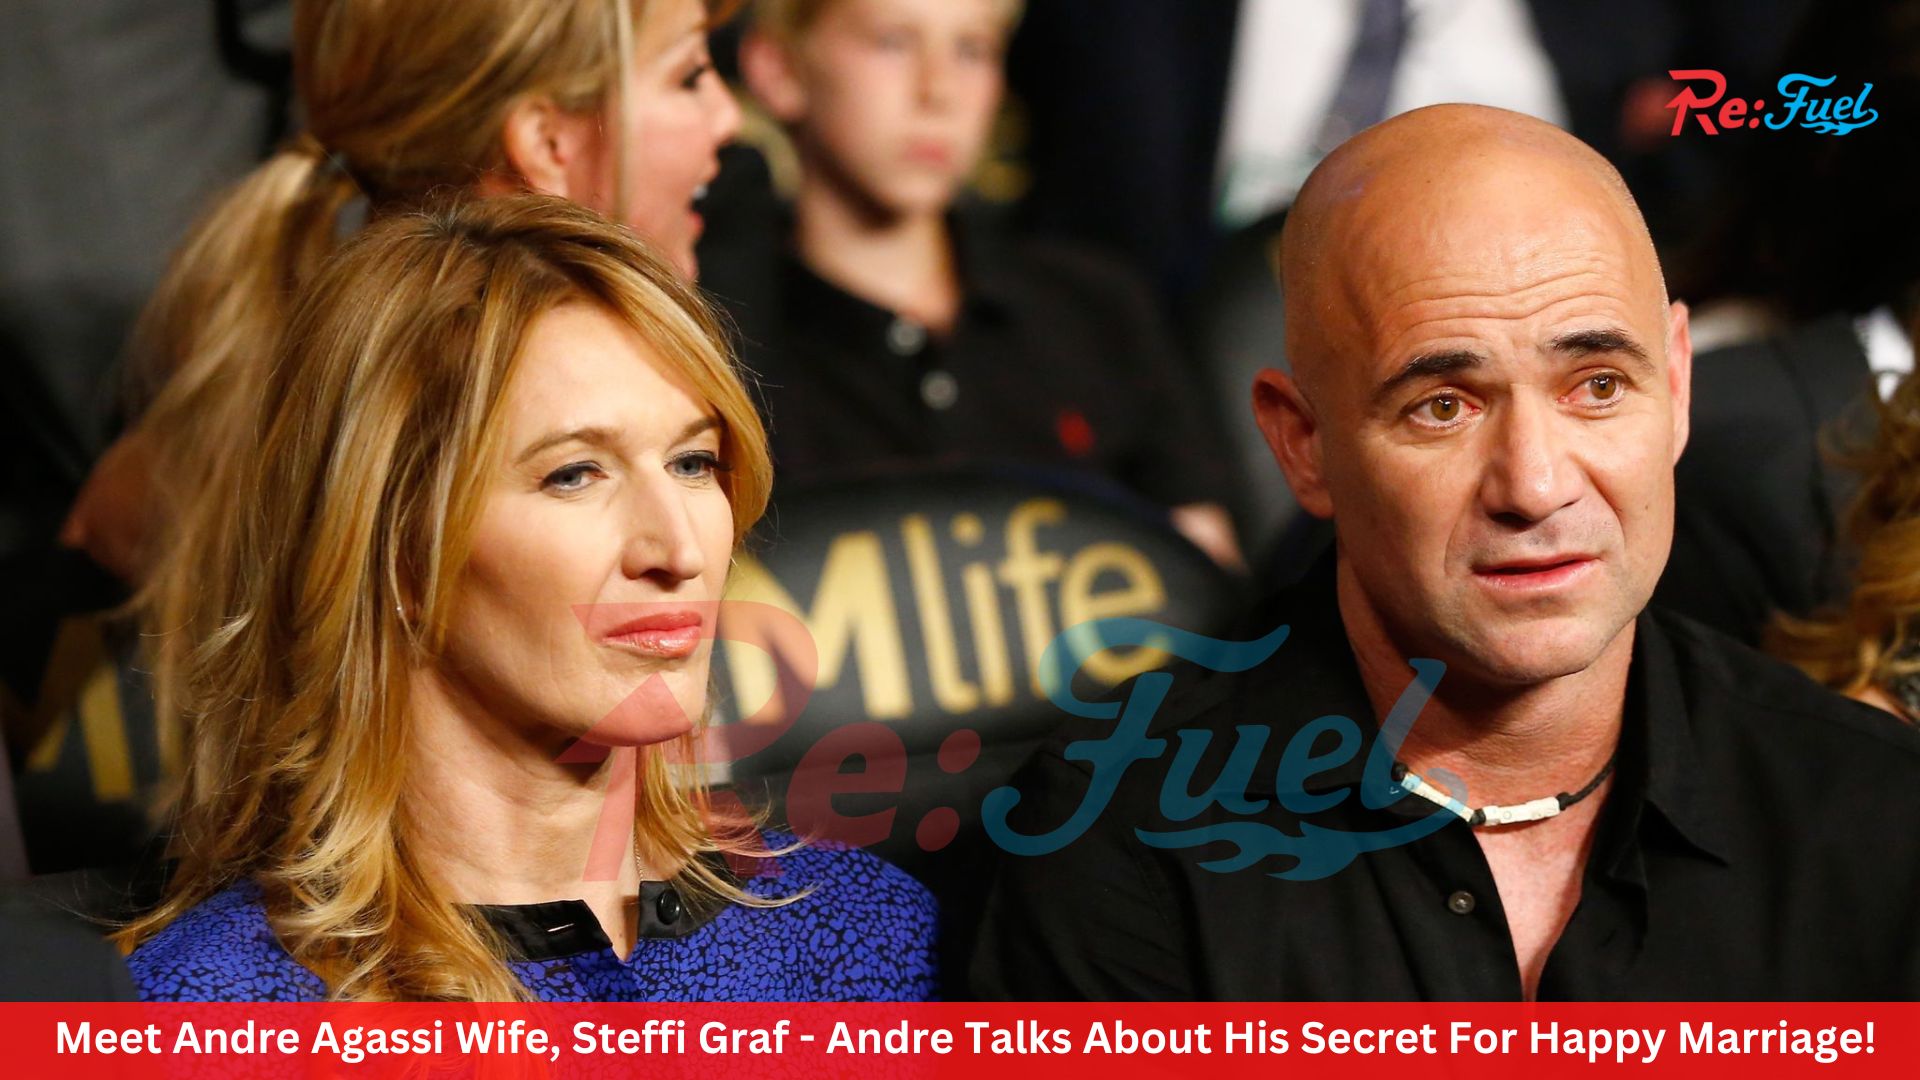 Meet Andre Agassi Wife, Steffi Graf - Andre Talks About His Secret For Happy Marriage!